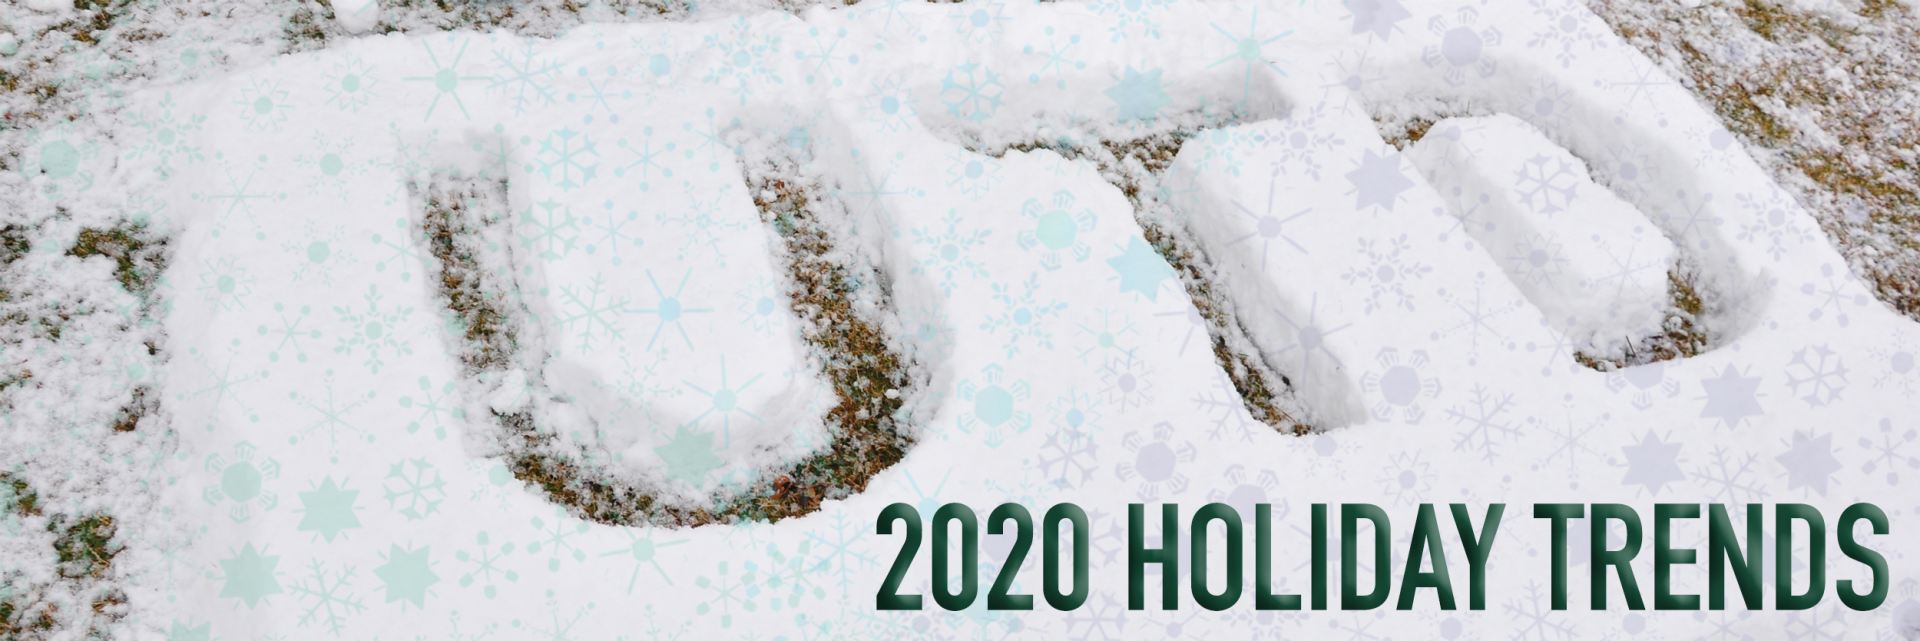 2020 Holiday trends